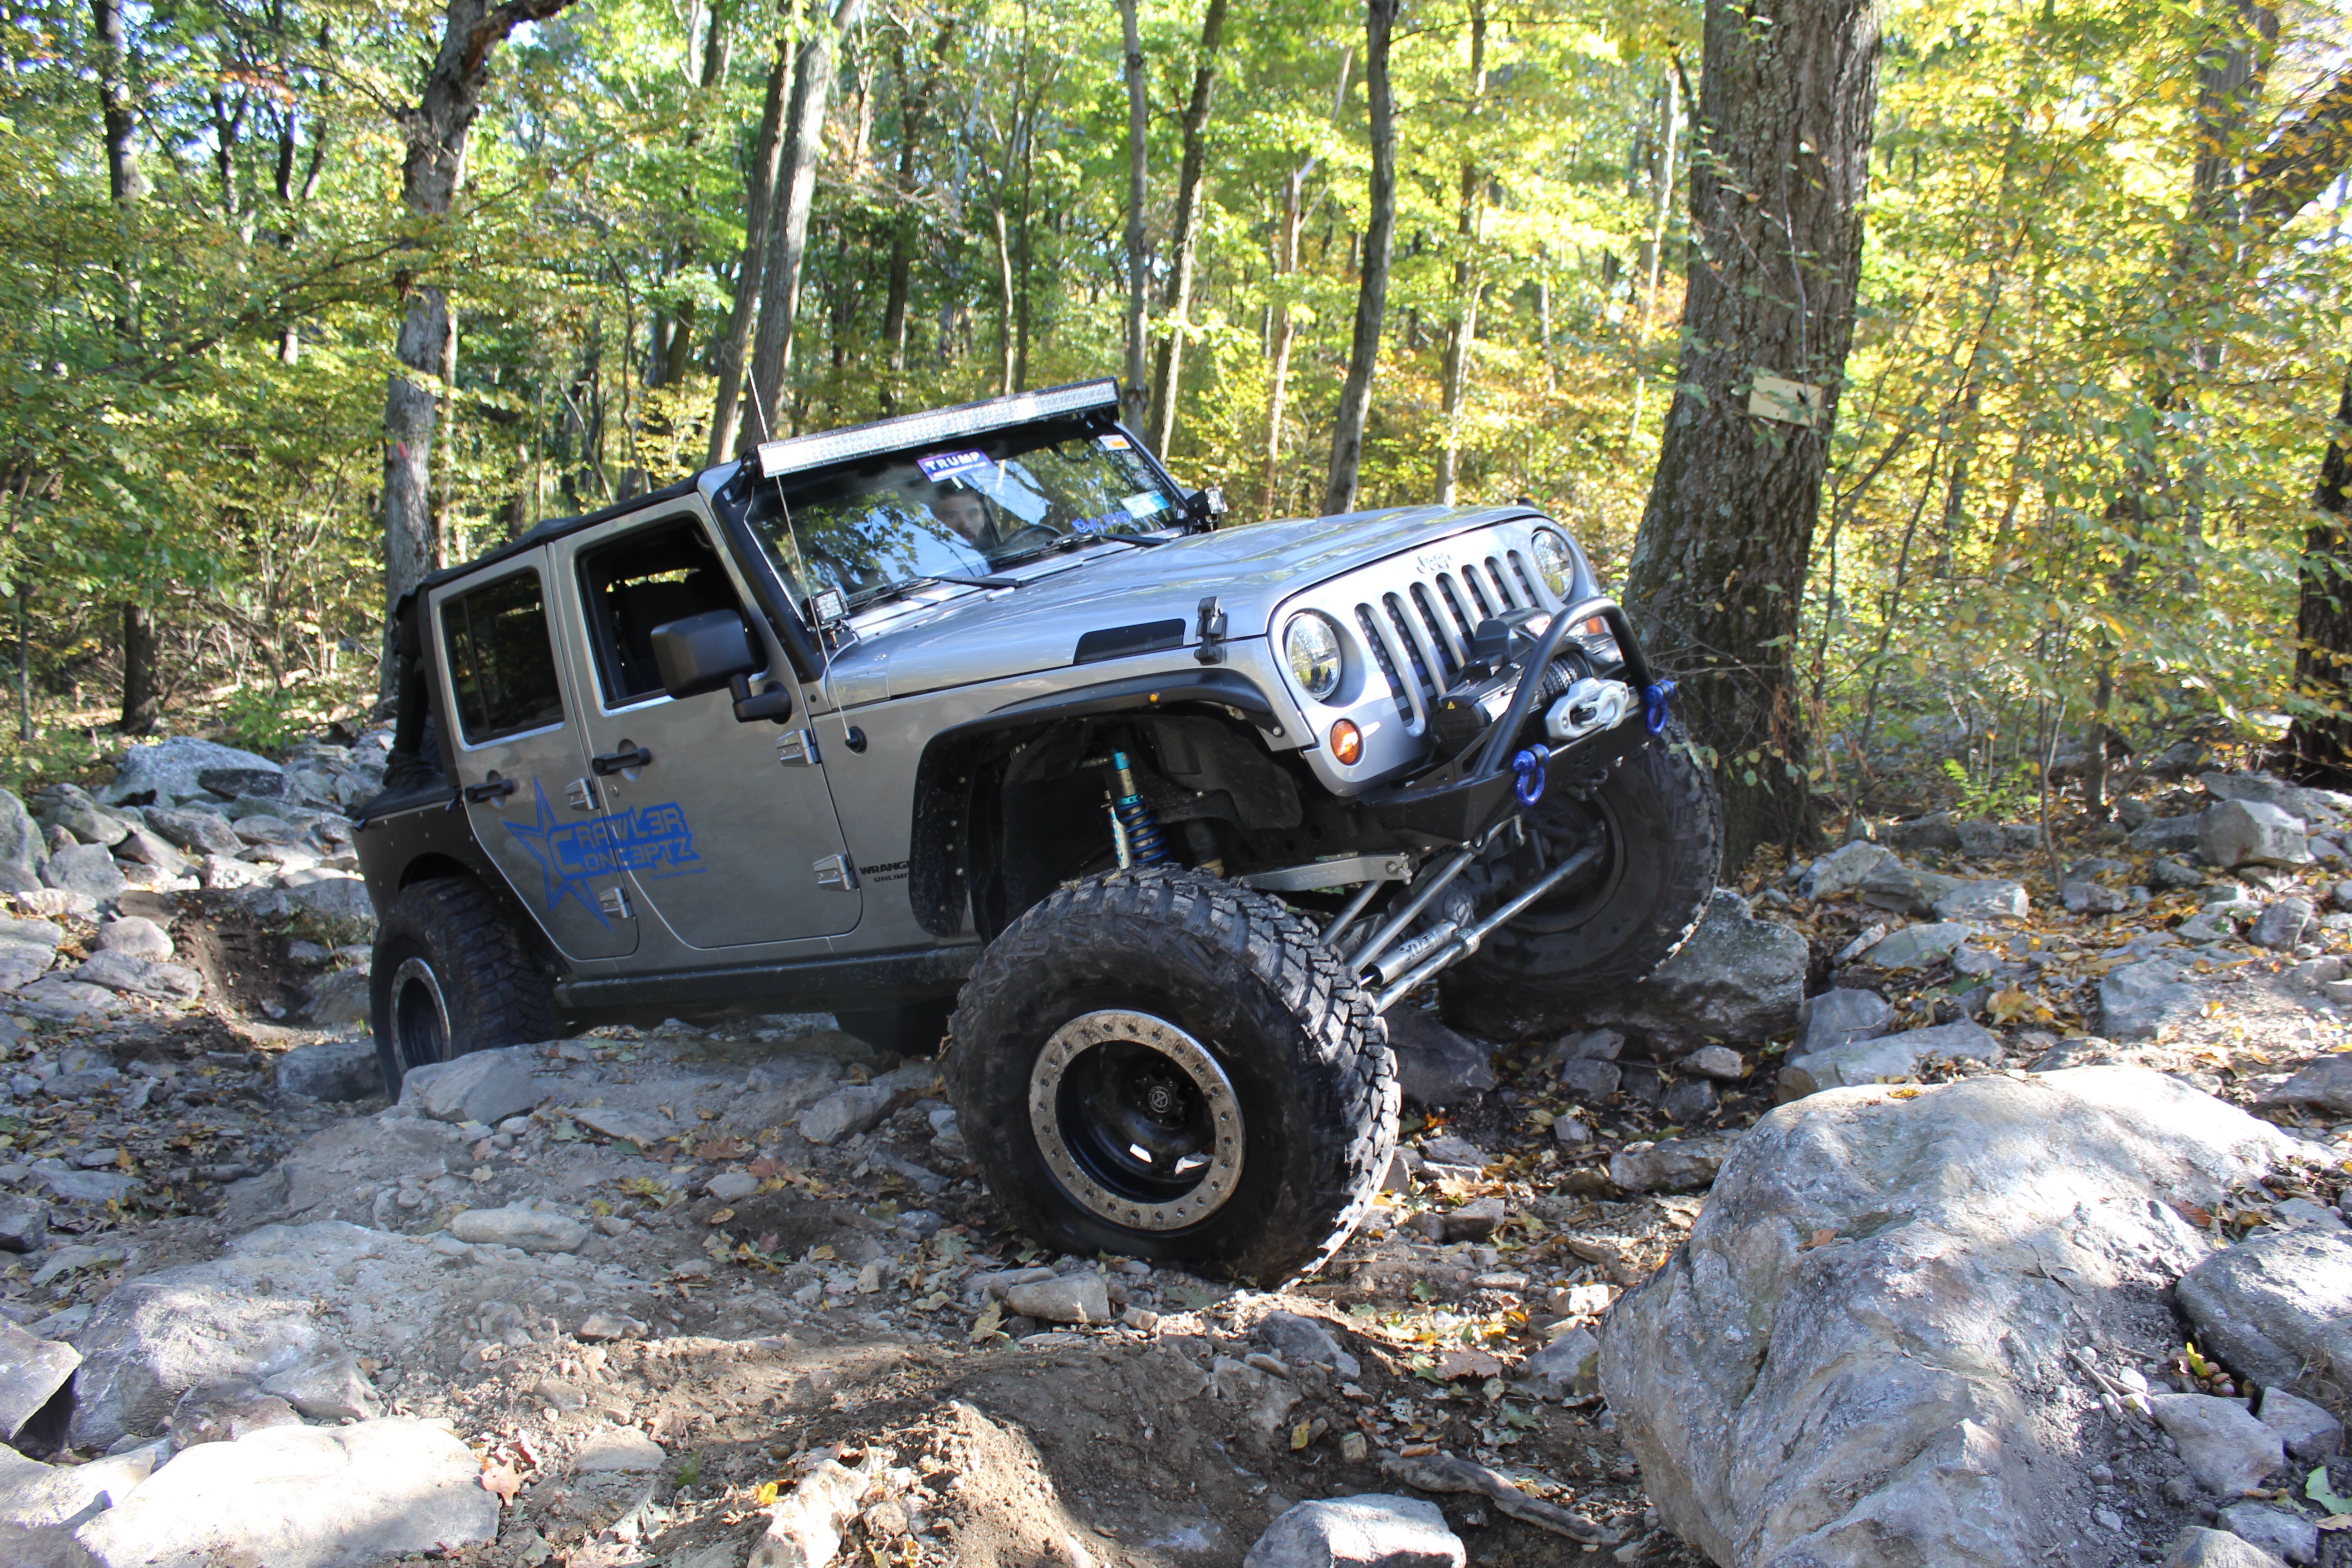 Jku with superduty axles  - The top destination for Jeep JK  and JL Wrangler news, rumors, and discussion